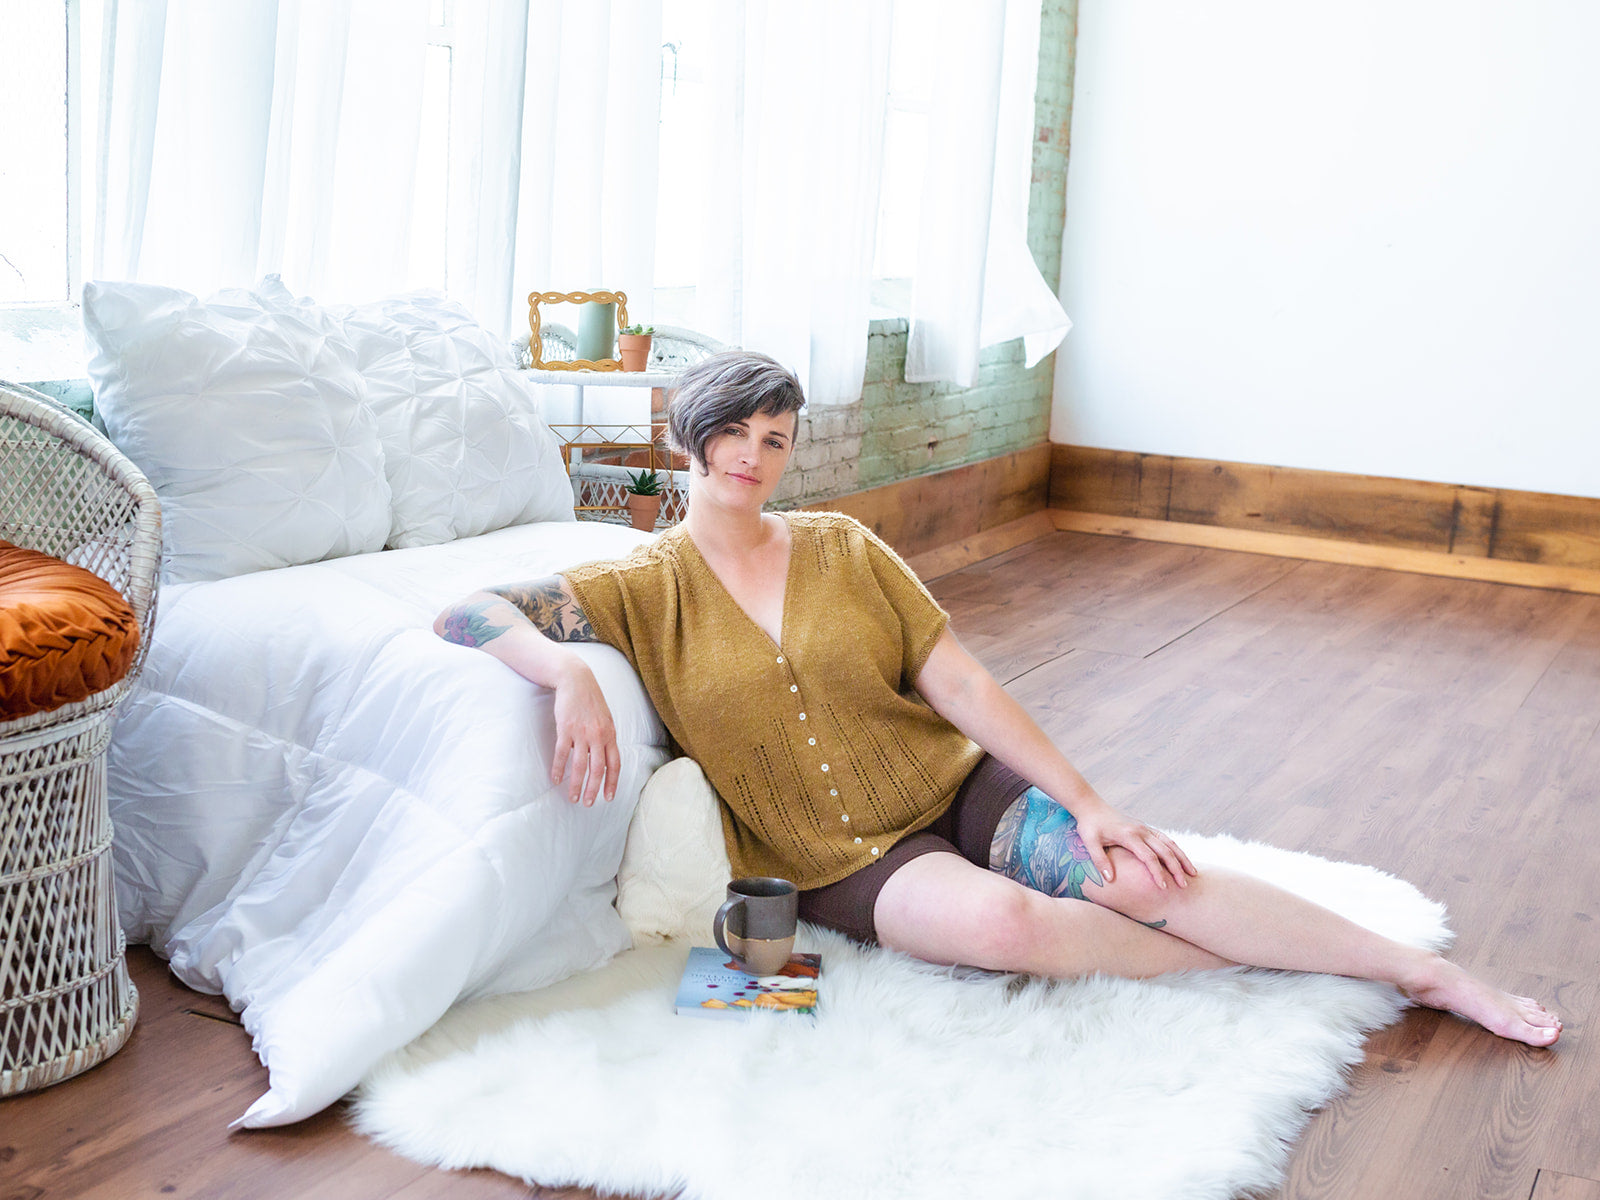 Jen seats on a sheepskin, leaning against the end of a chaise. She smiles at the camera, wearing black shorts with a gold, hand knit tee. The tee is designed in a dolman style, buttoned with small pearl buttons and featuring a lace stitch.